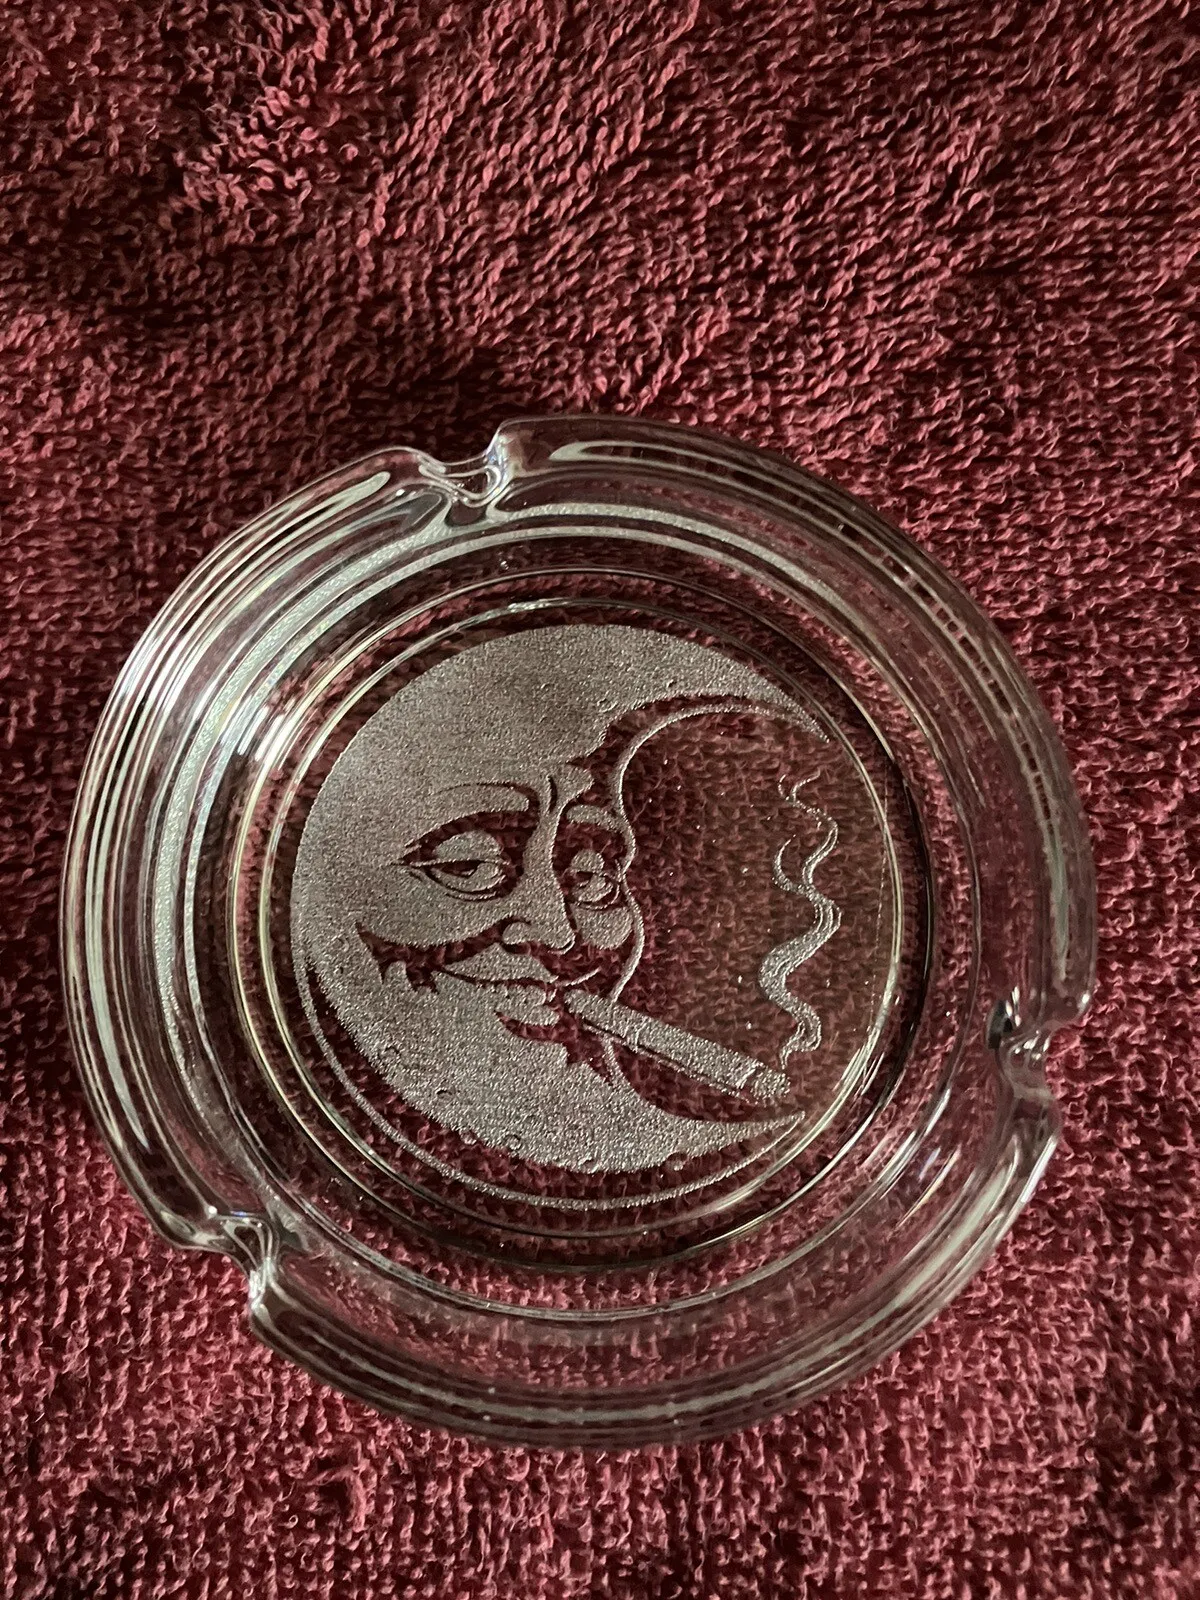 Custom laser etched glass tobacco decorative ashtray. Moon Face Smoking - $25.00